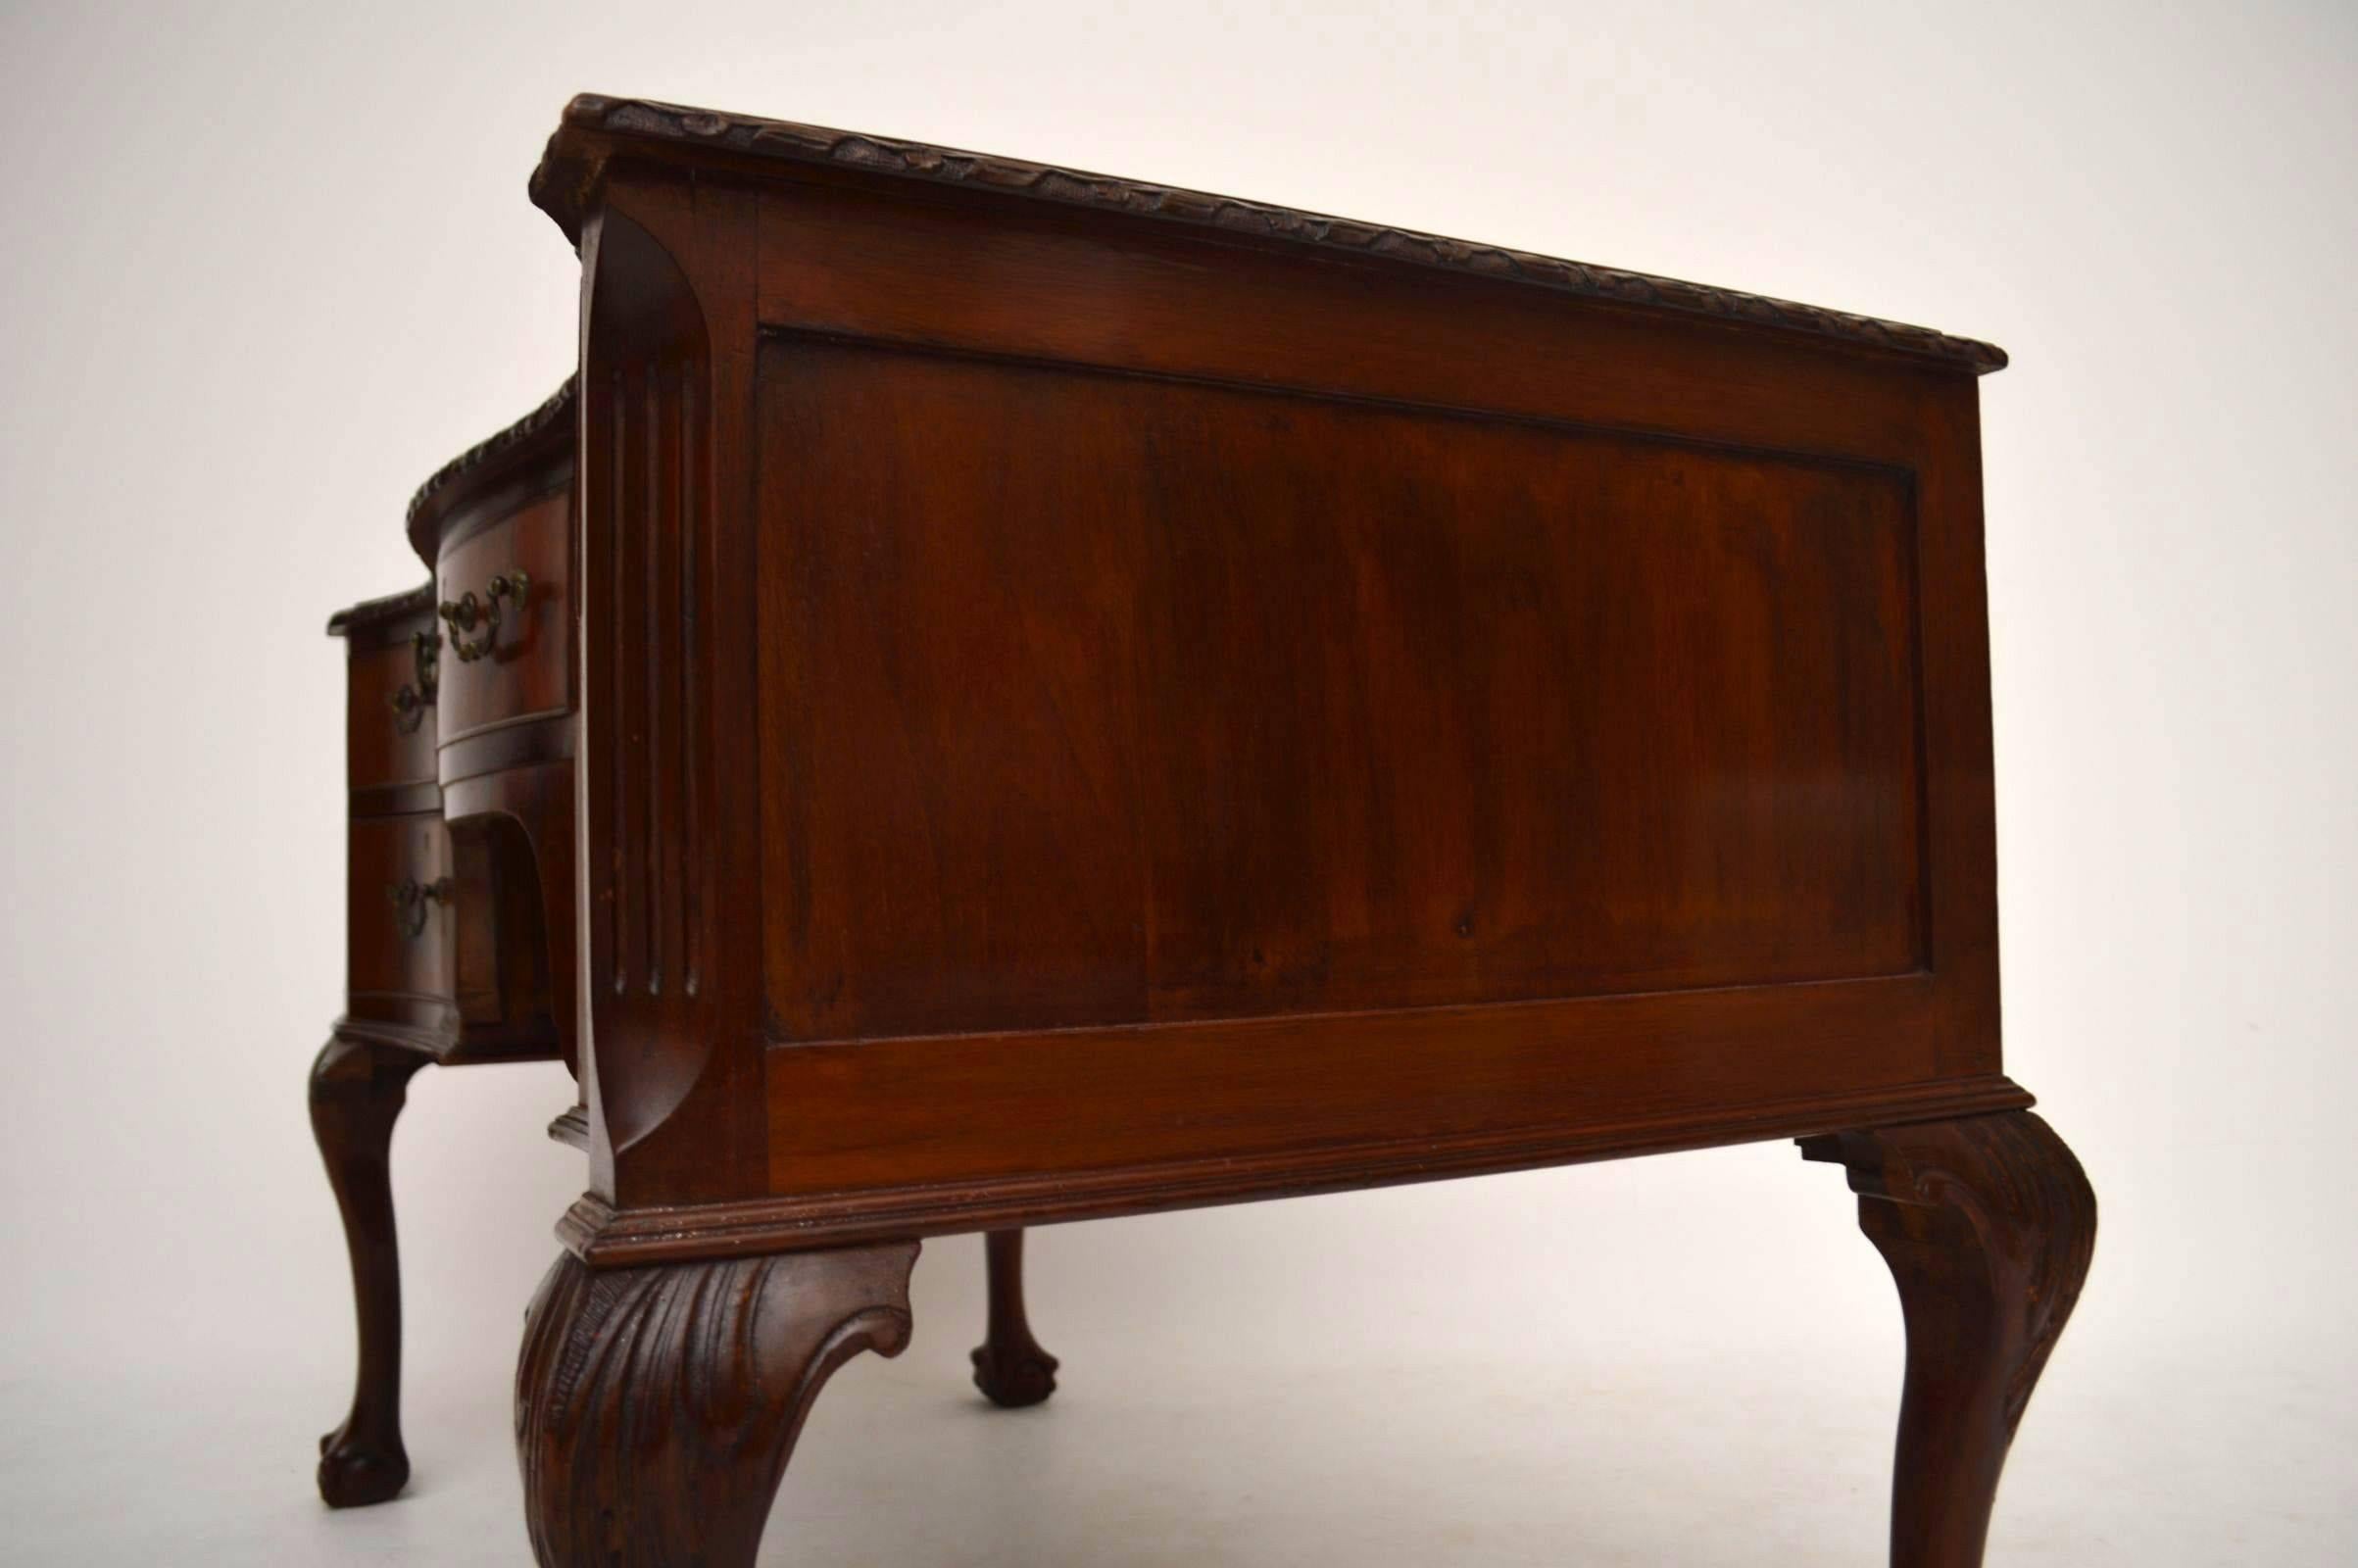 English Antique Carved Mahogany Leather Top Desk